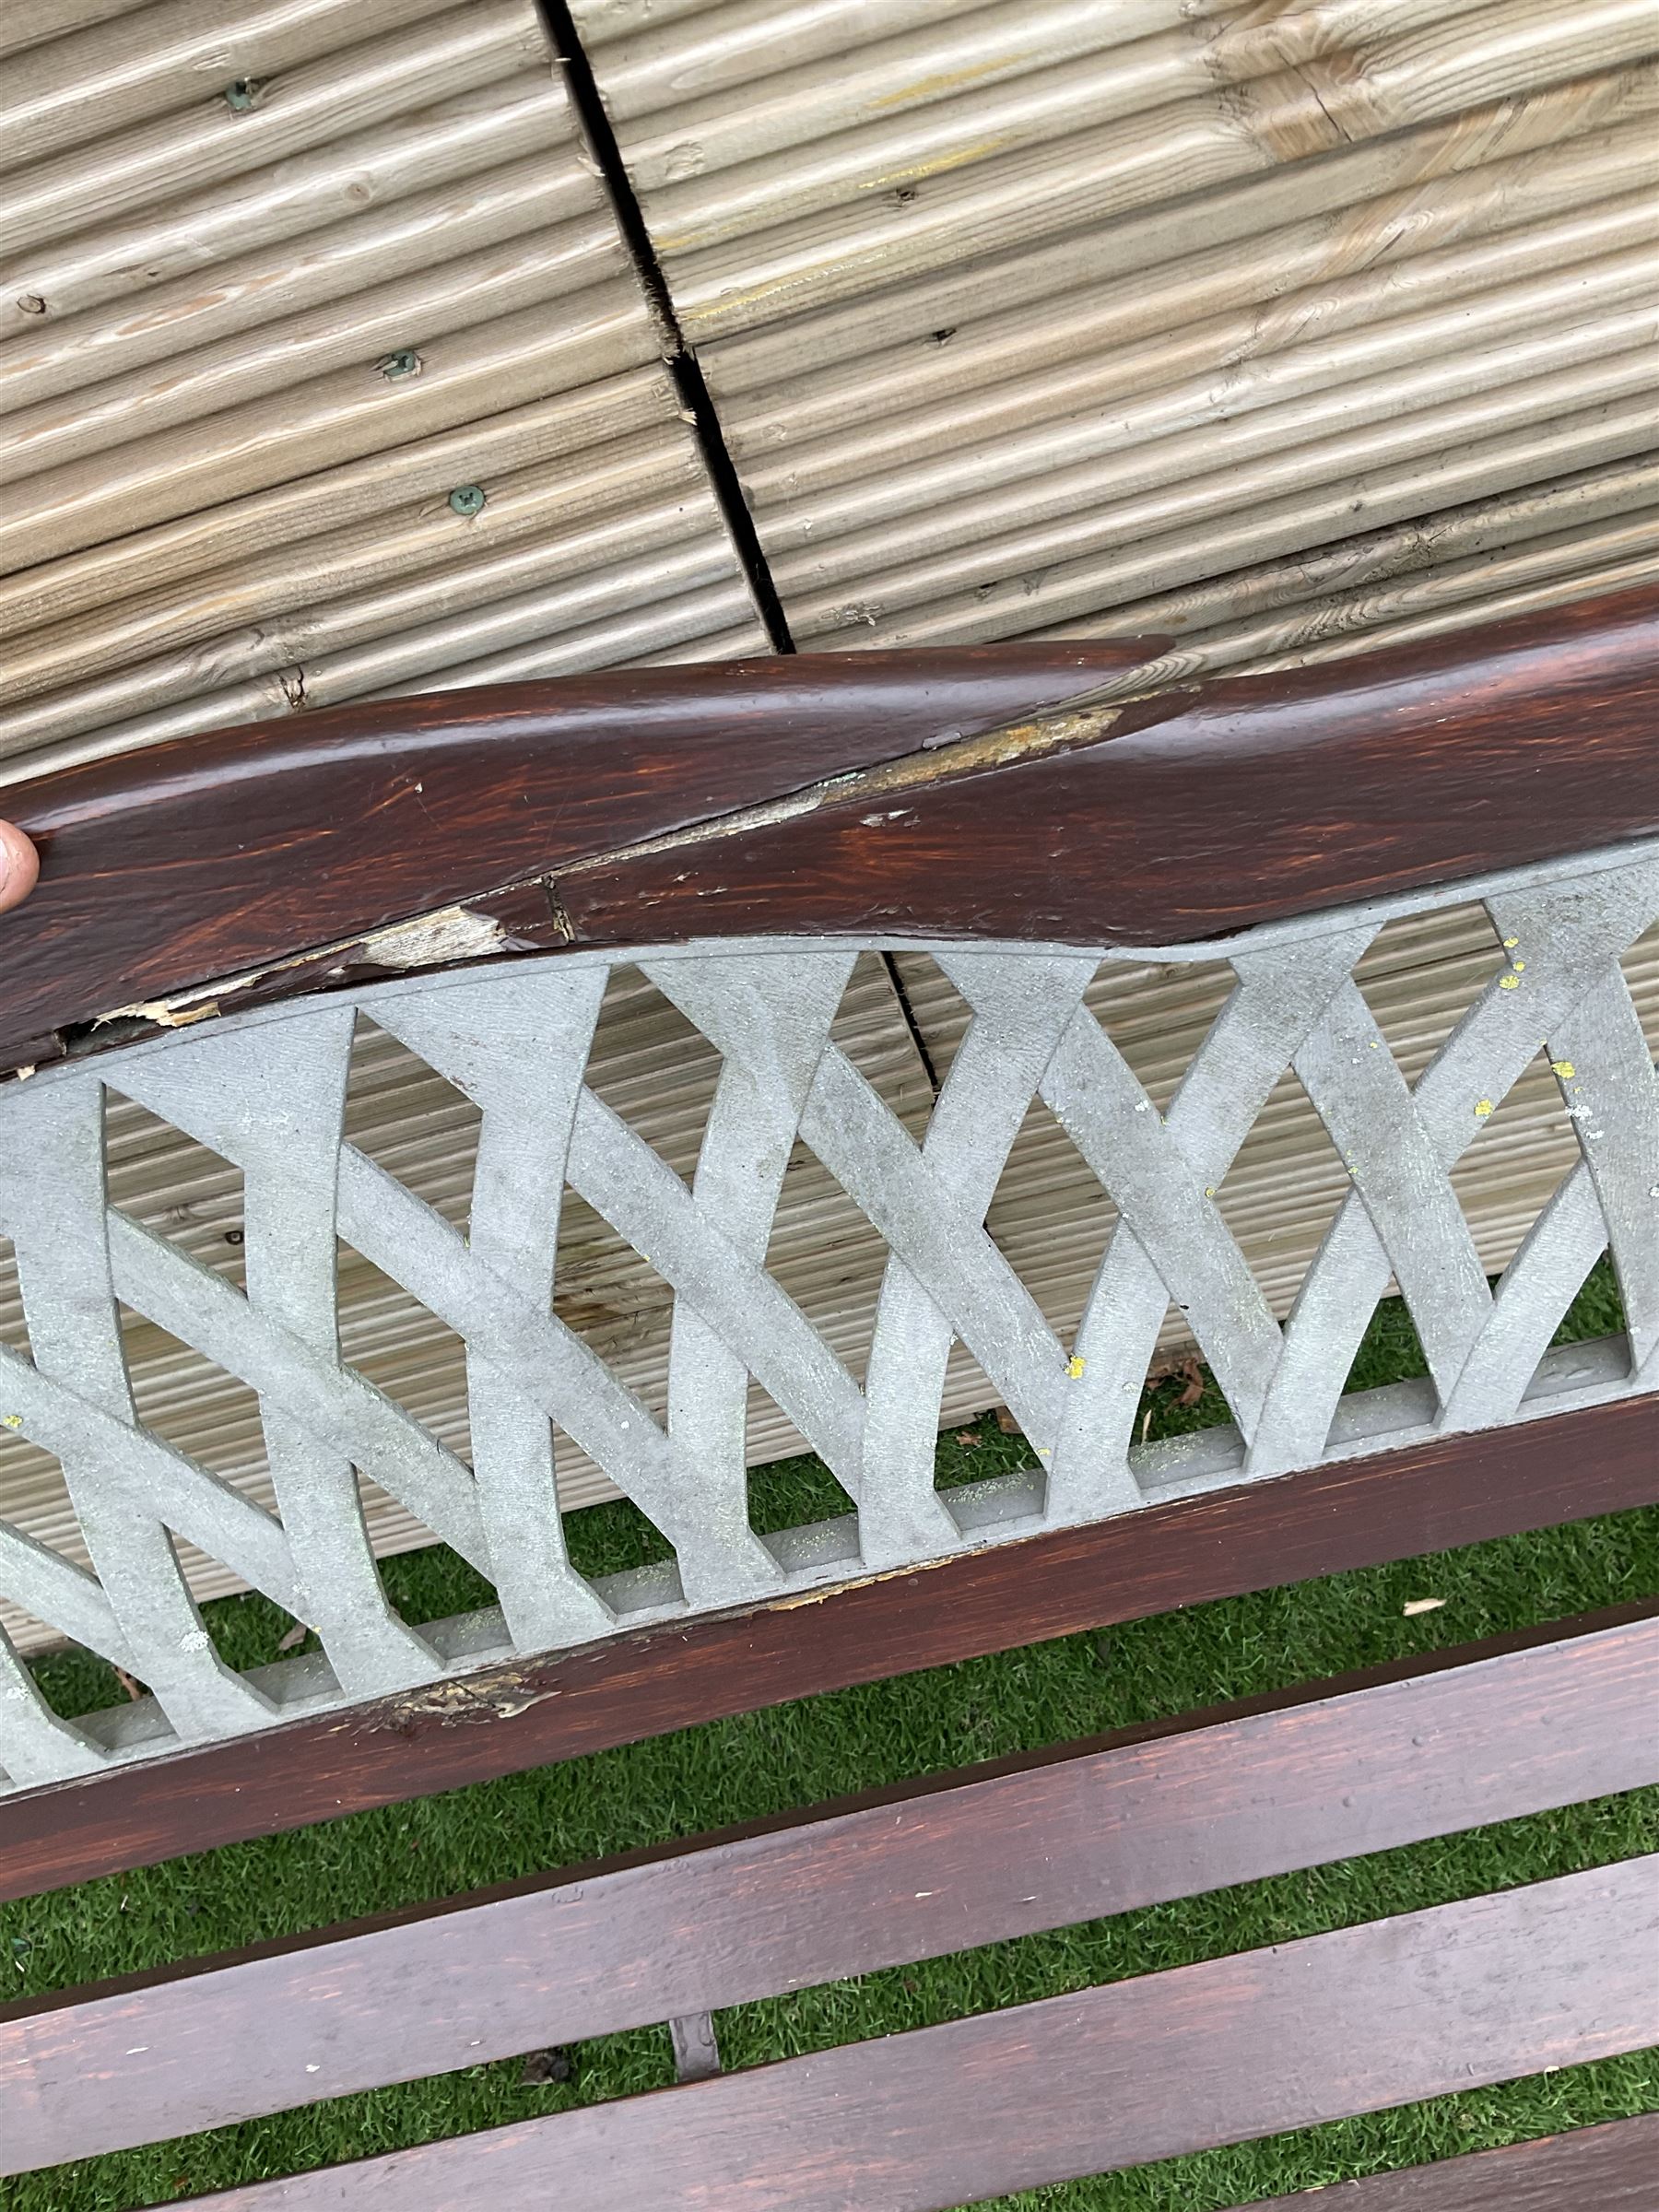 Large cast metal and wood slatted garden bench with lattice back - Image 4 of 4